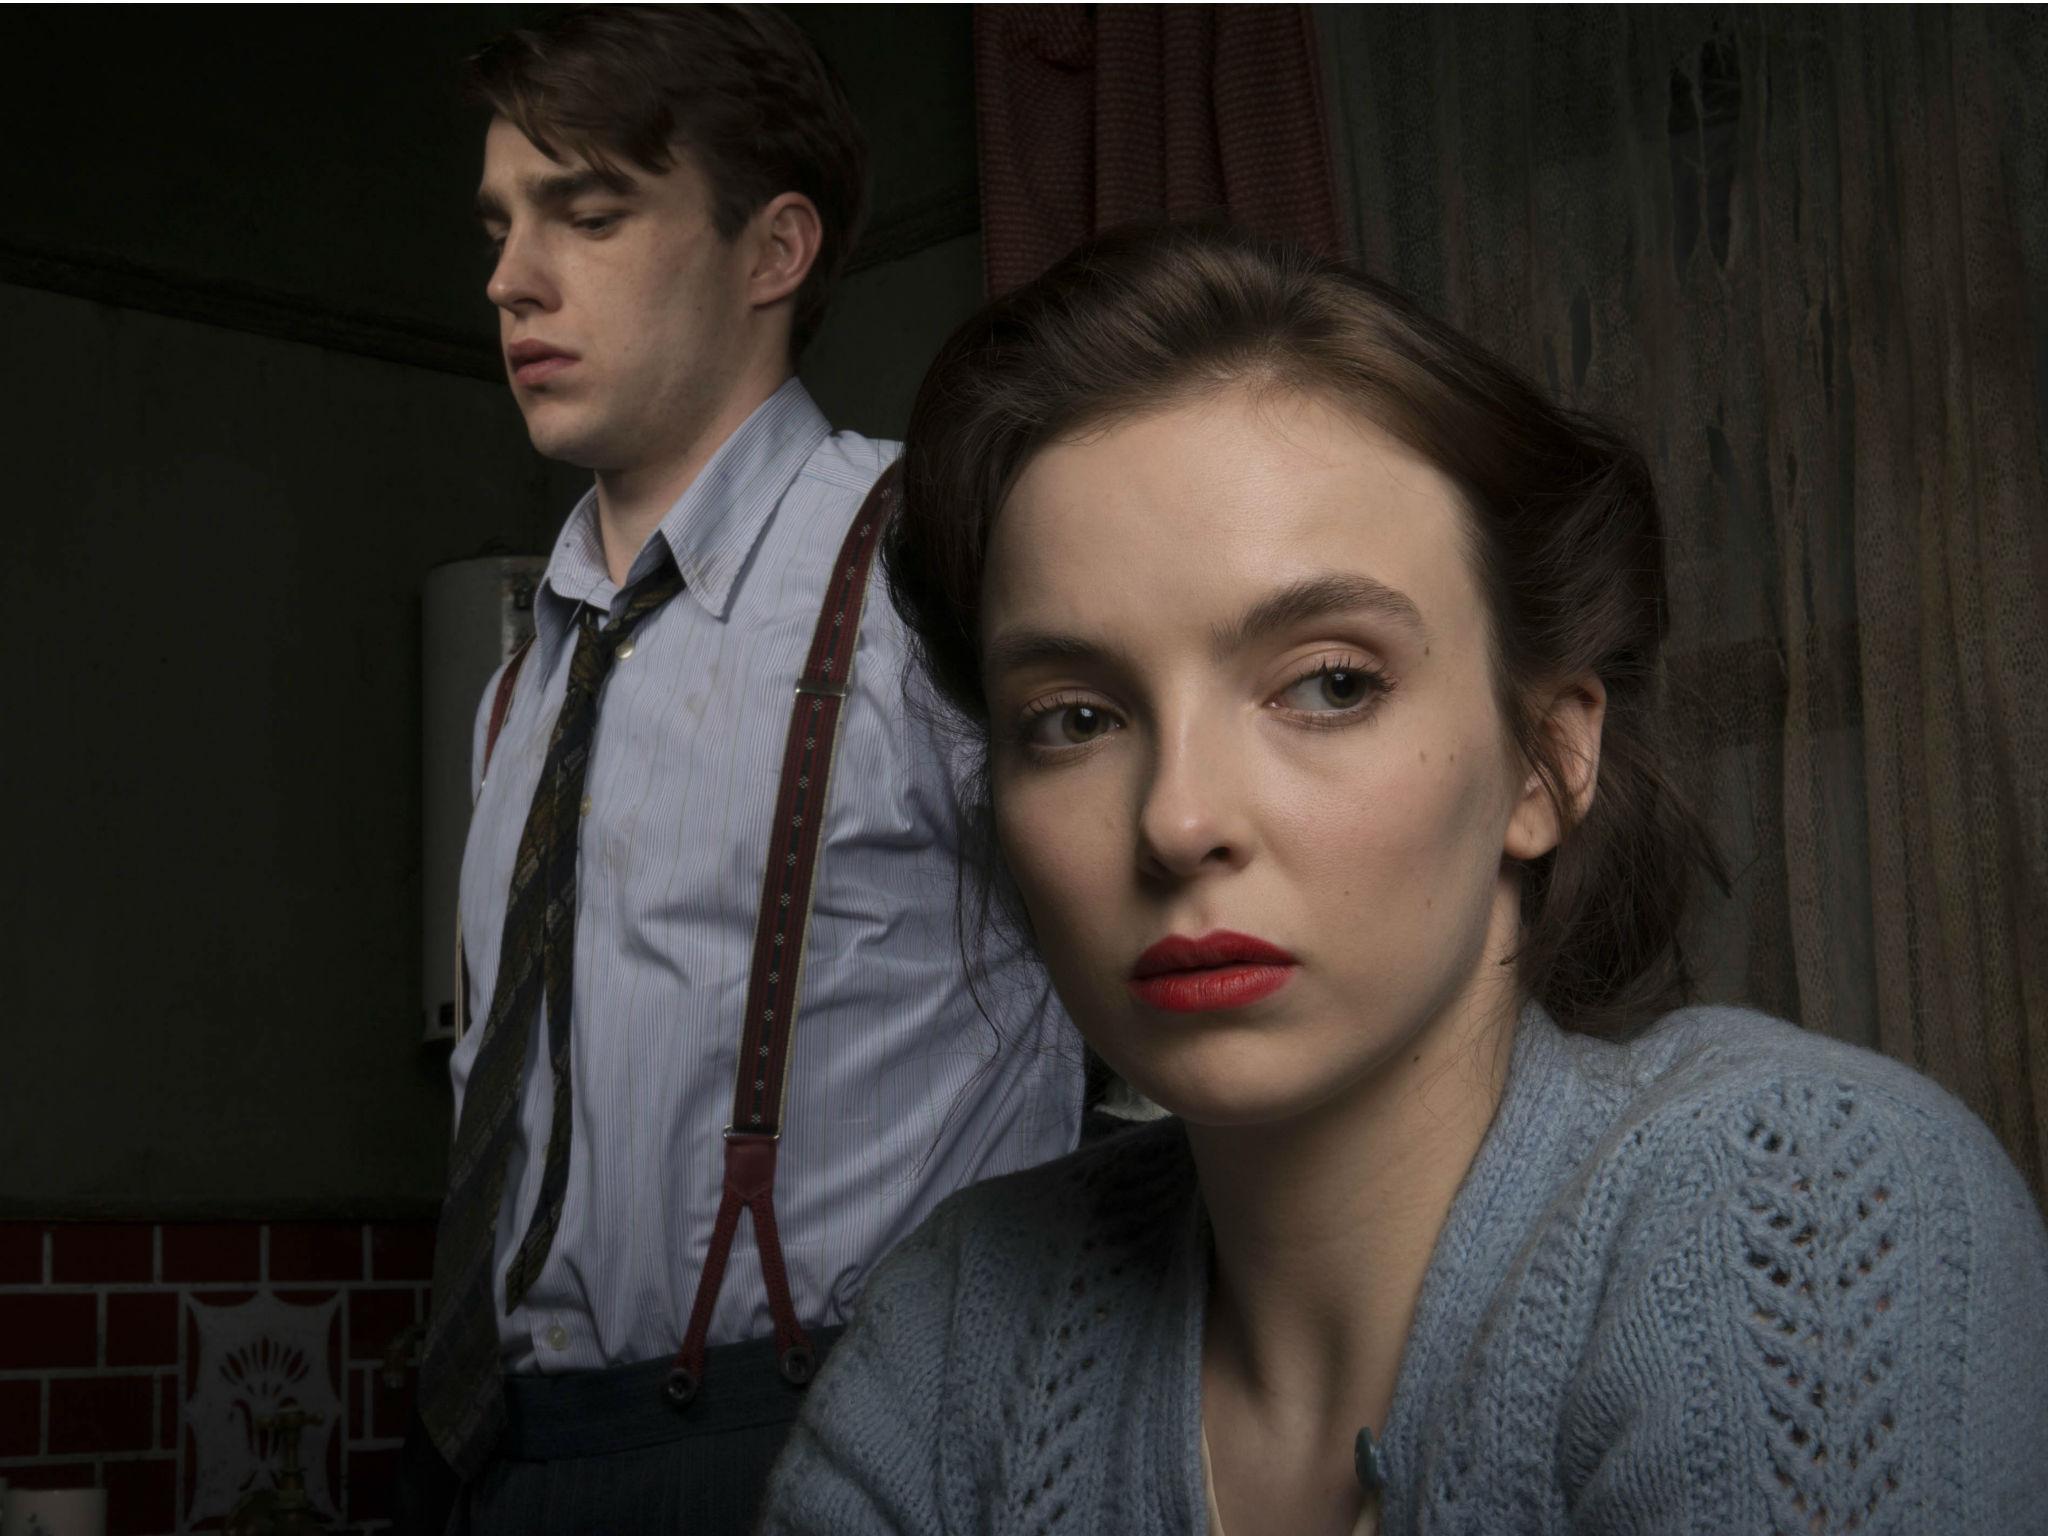 Comer as Beryl Evans and Mirallegro as Timothy Evans in ‘Rillington Place’